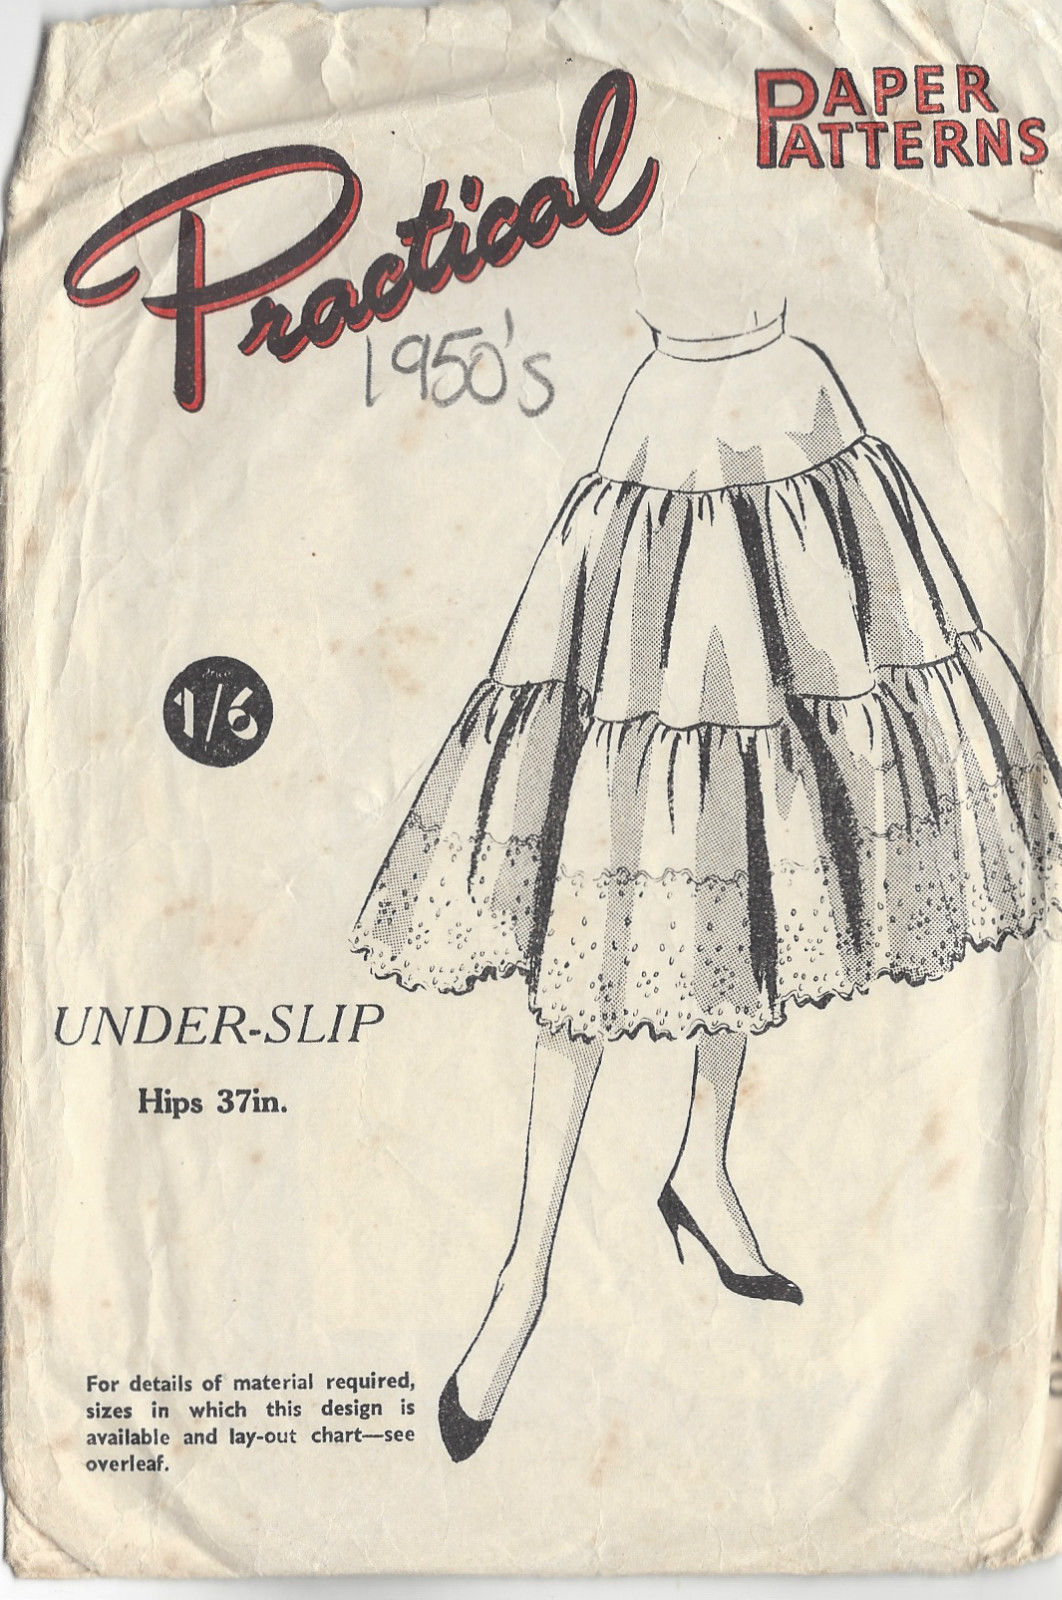 Beautiful Fashion Designs by Luis Estévez in the 1950s and '60s ~ Vintage  Everyday